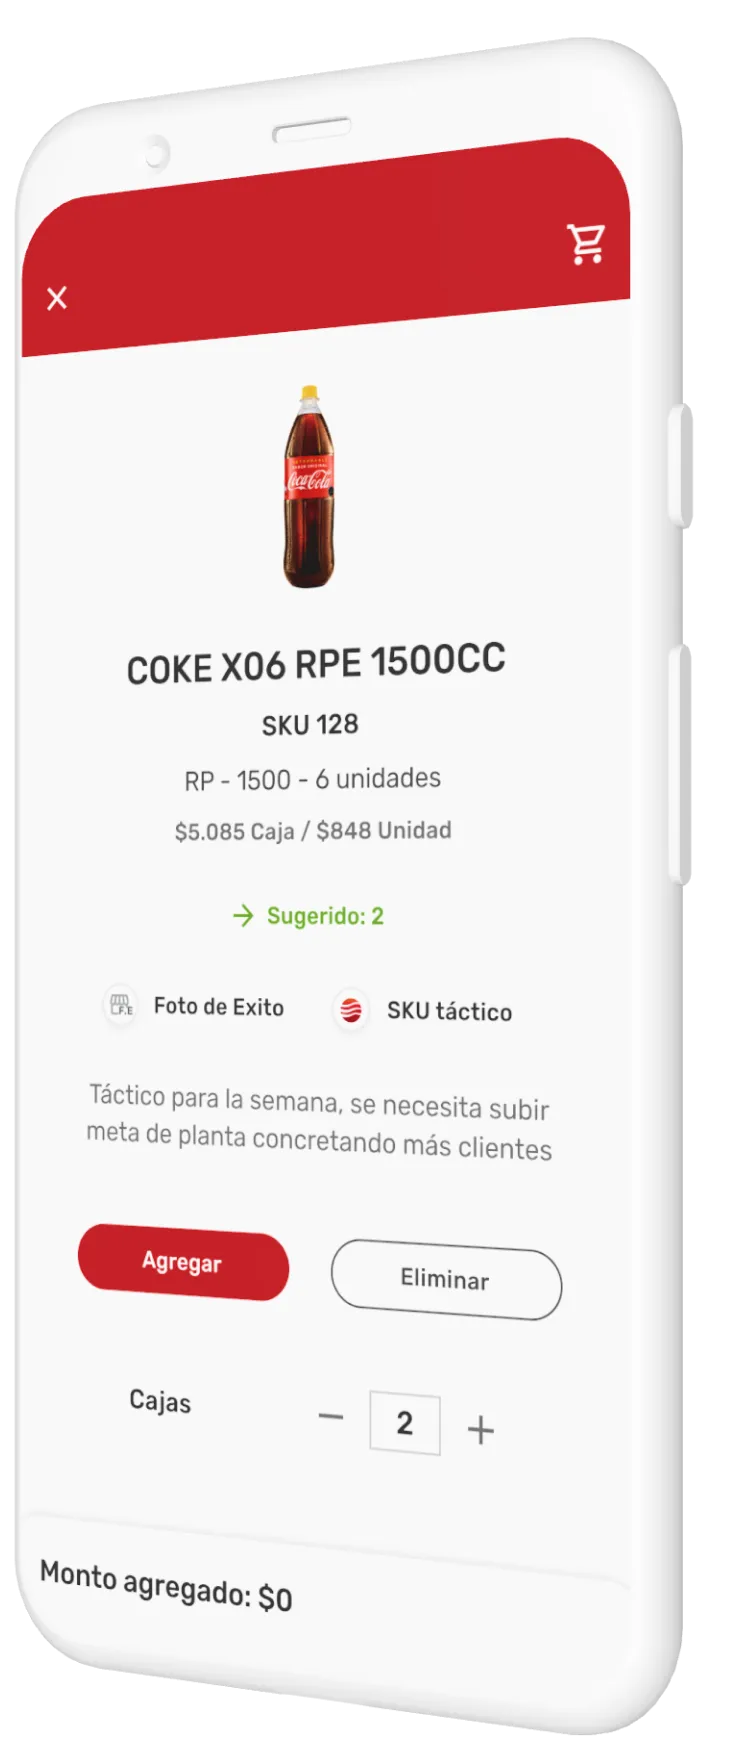 An iPhone displays the check out screen for a bottle of coca-cola